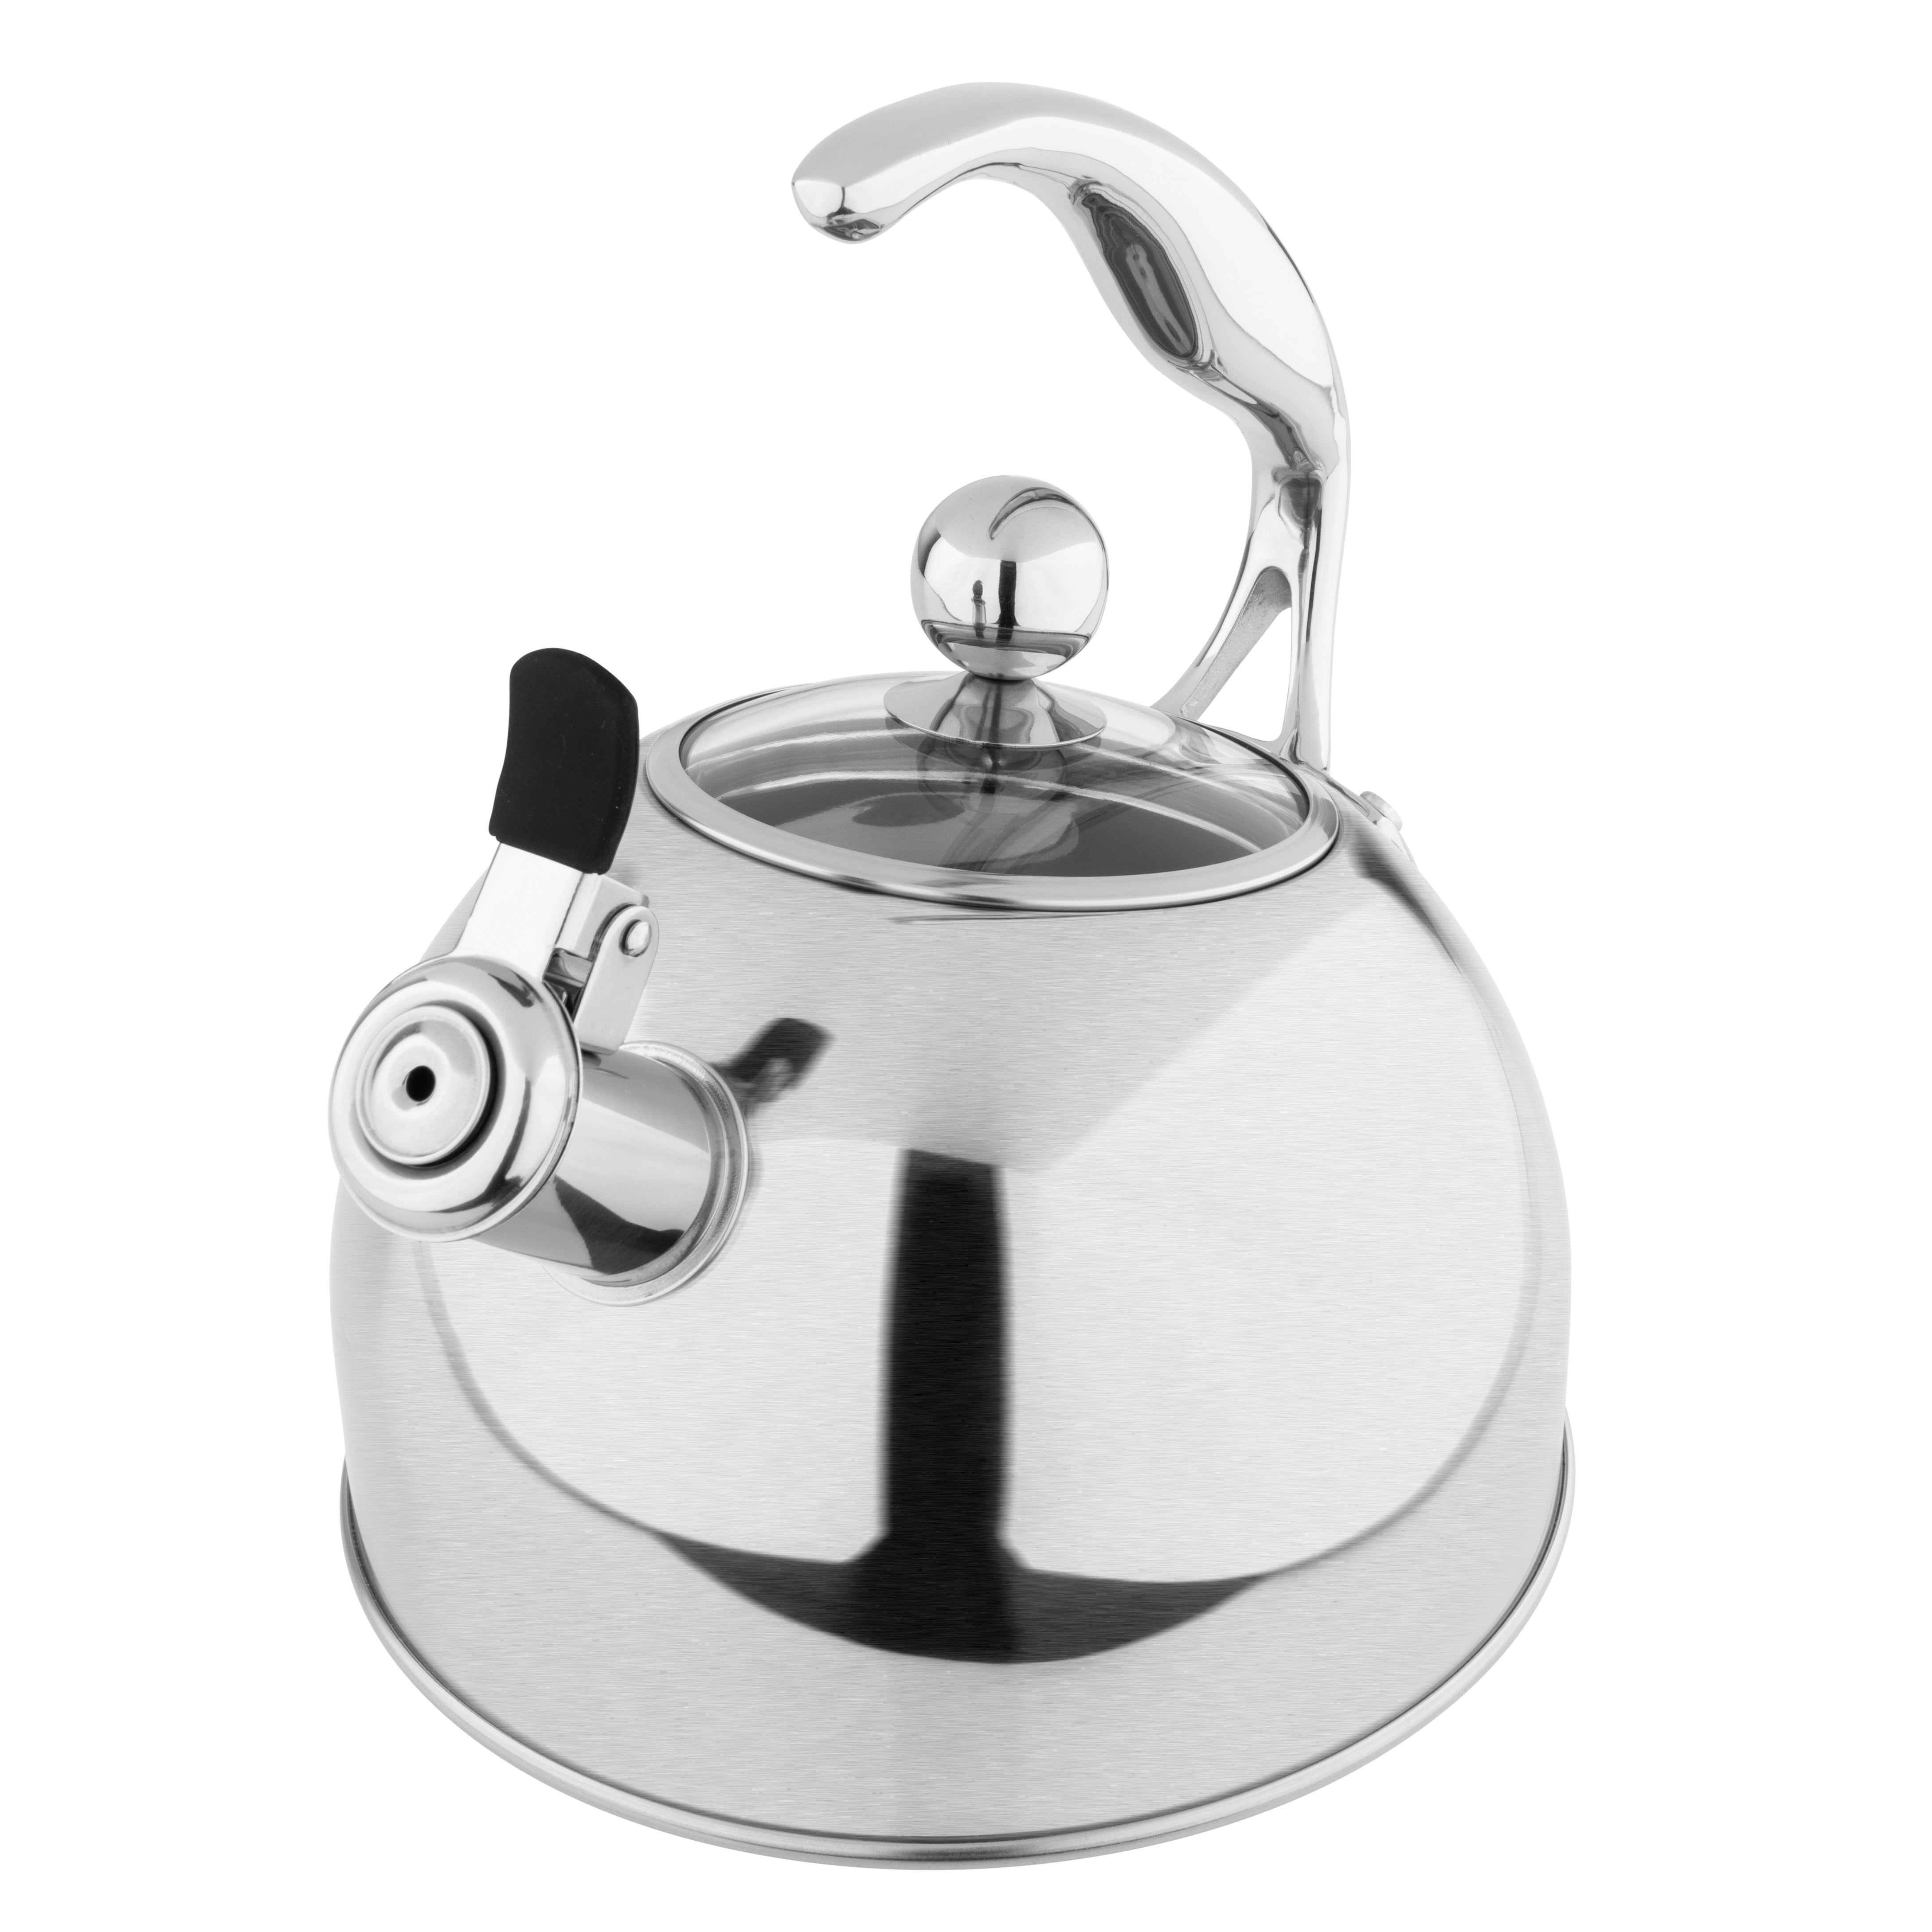 2.5L Enameled Teakettle with Handle, Steel Teapot Colorful Tea Kettle for  Stovetop, Hot Water, No Whistling White